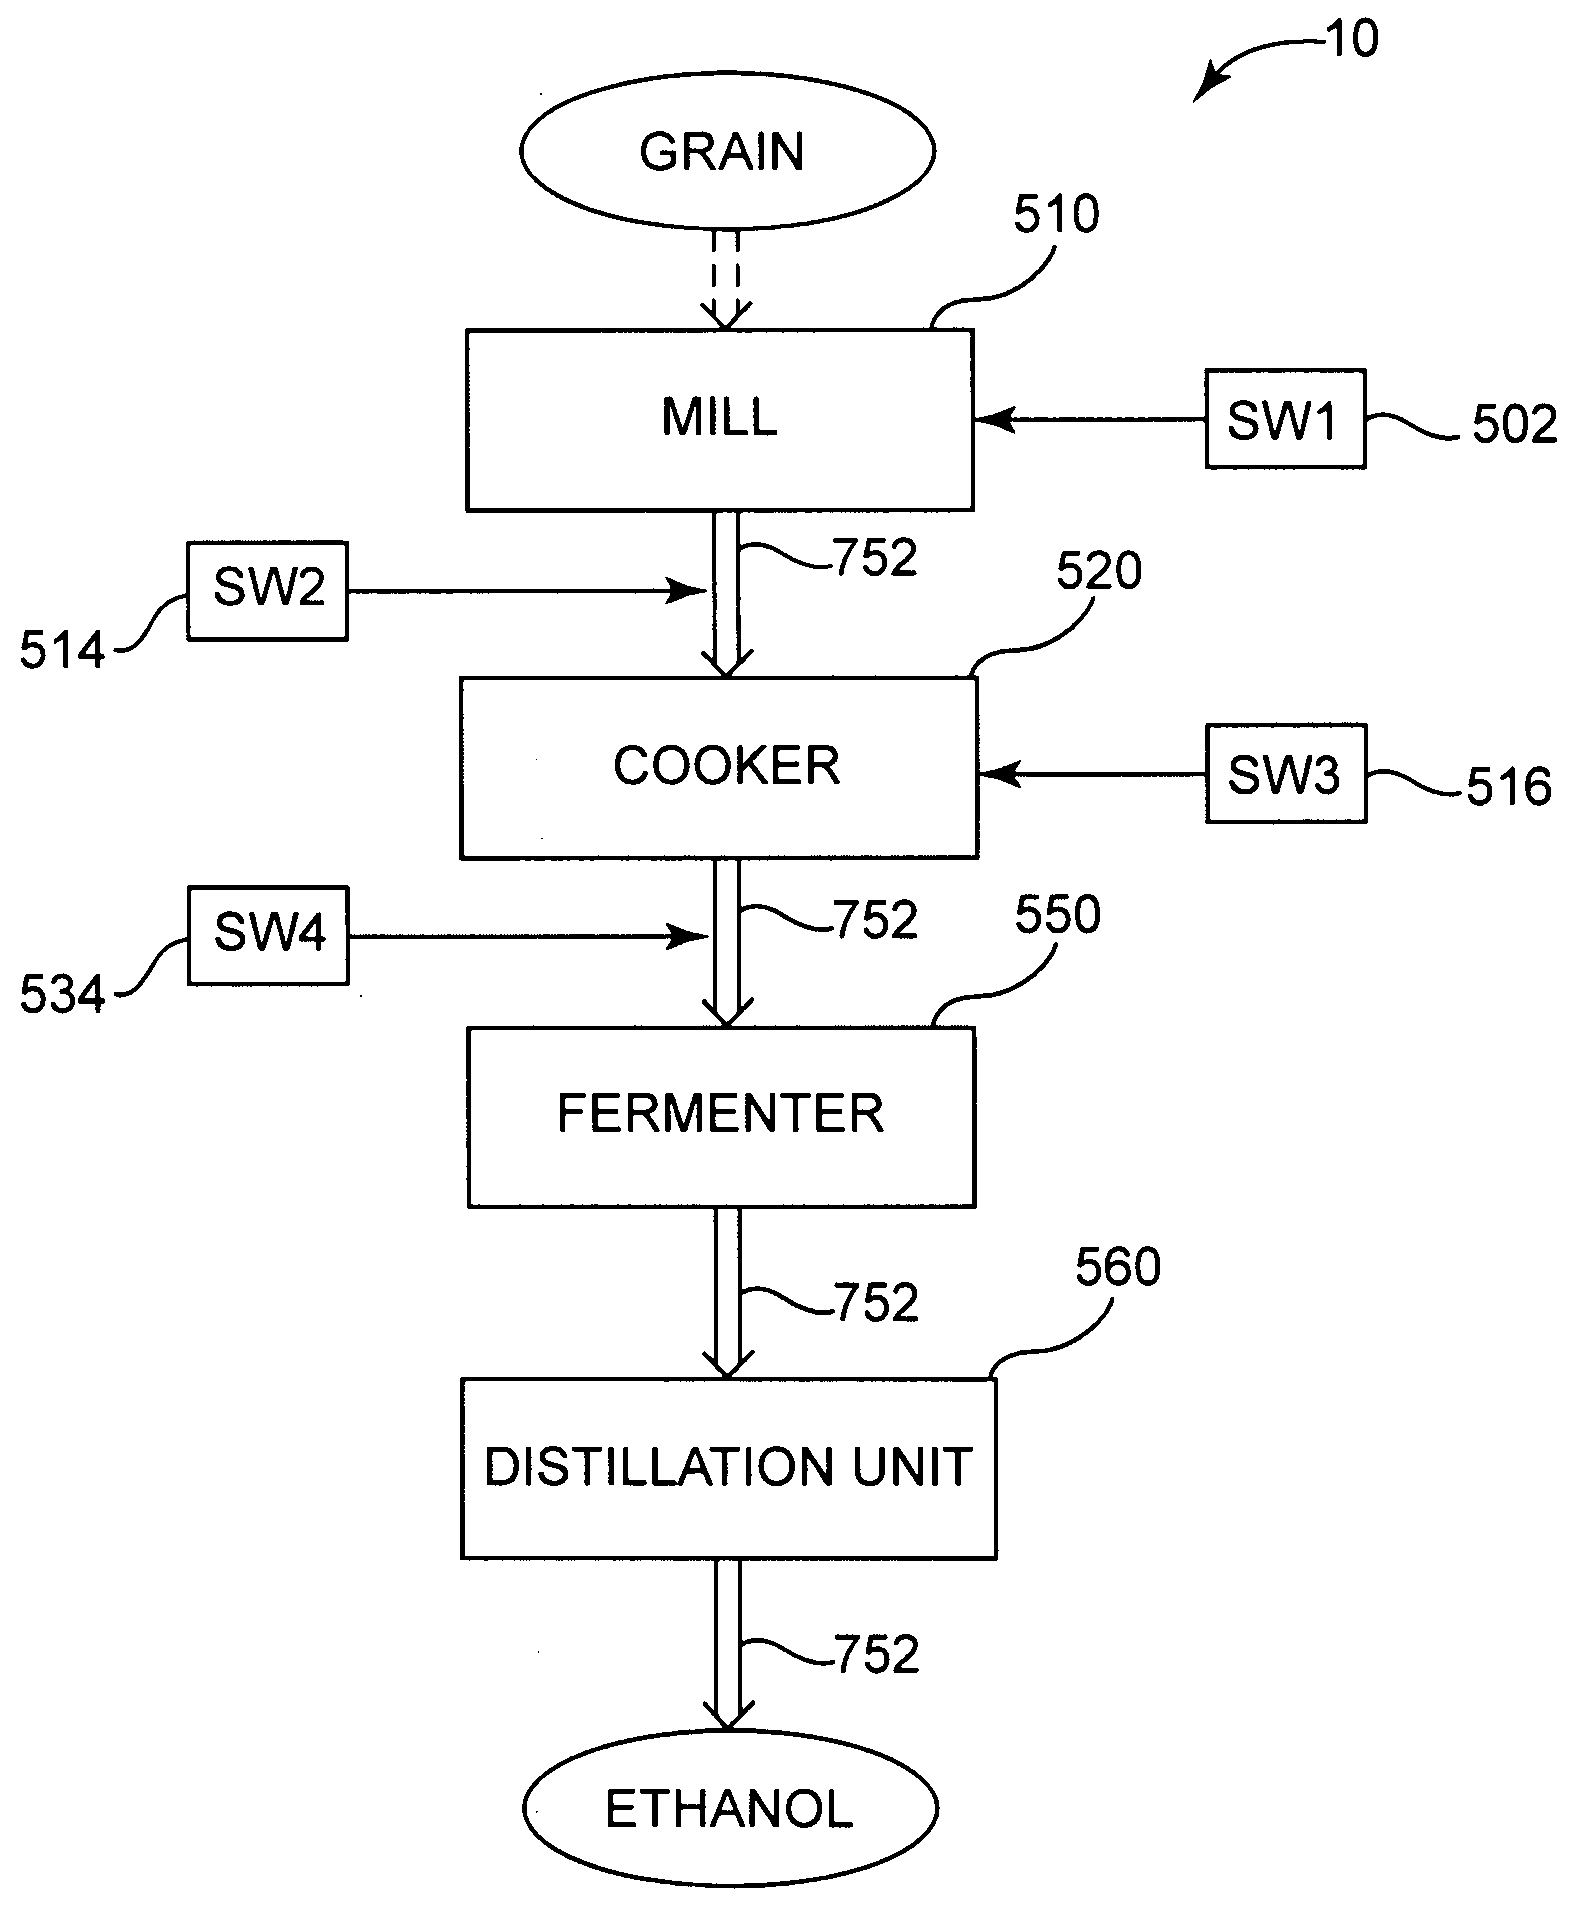 Apparatus and methods for ethanol production